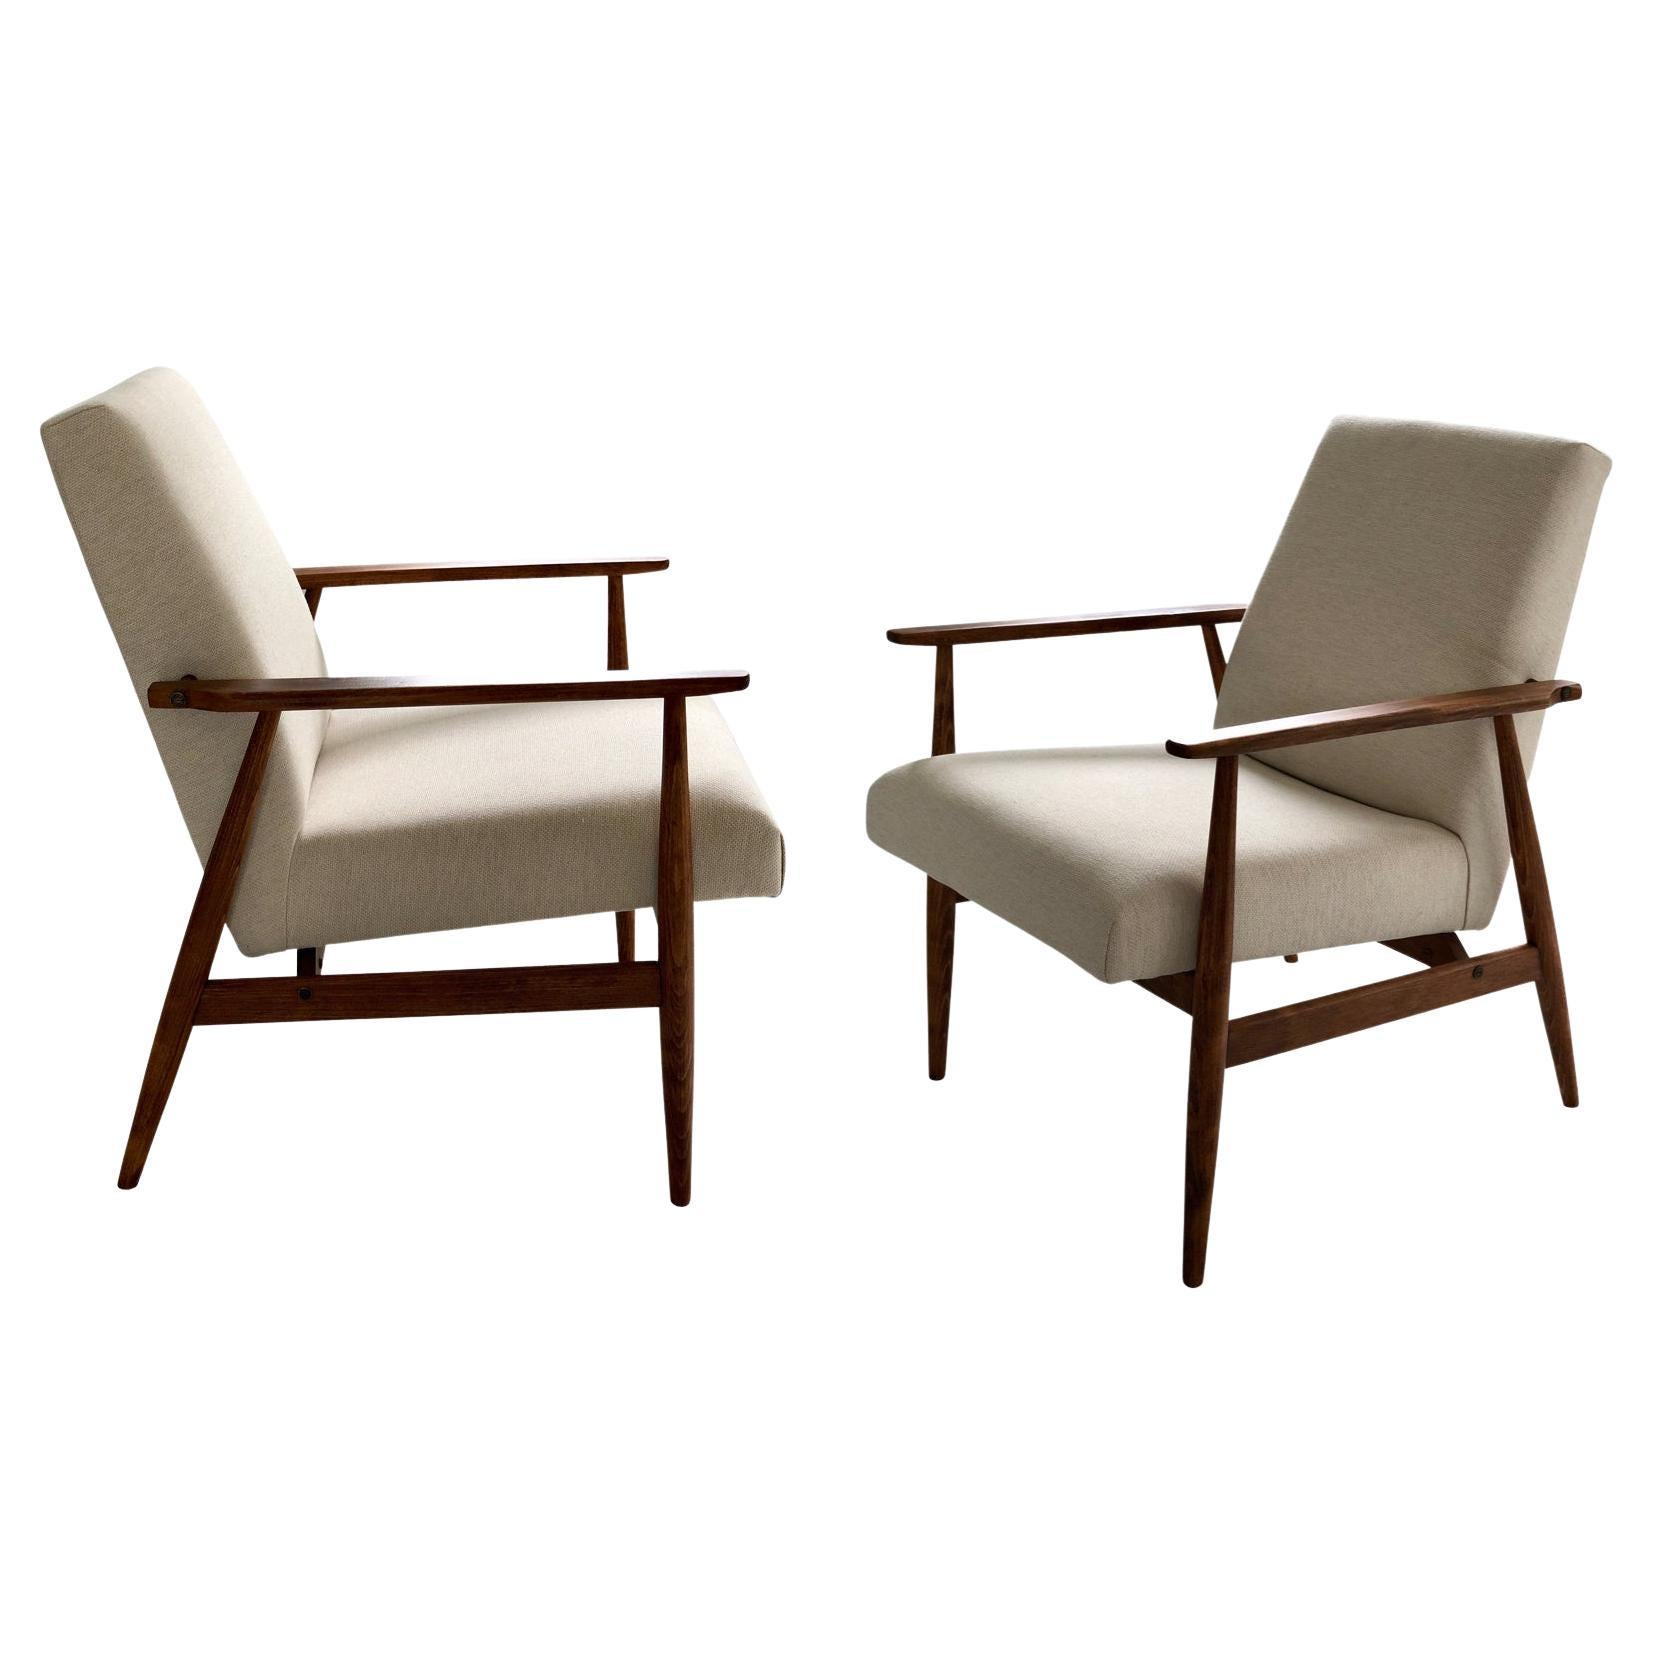 Midcentury Set of Two Beige Armchairs by Henryk Lis, Europe, 1960s For Sale